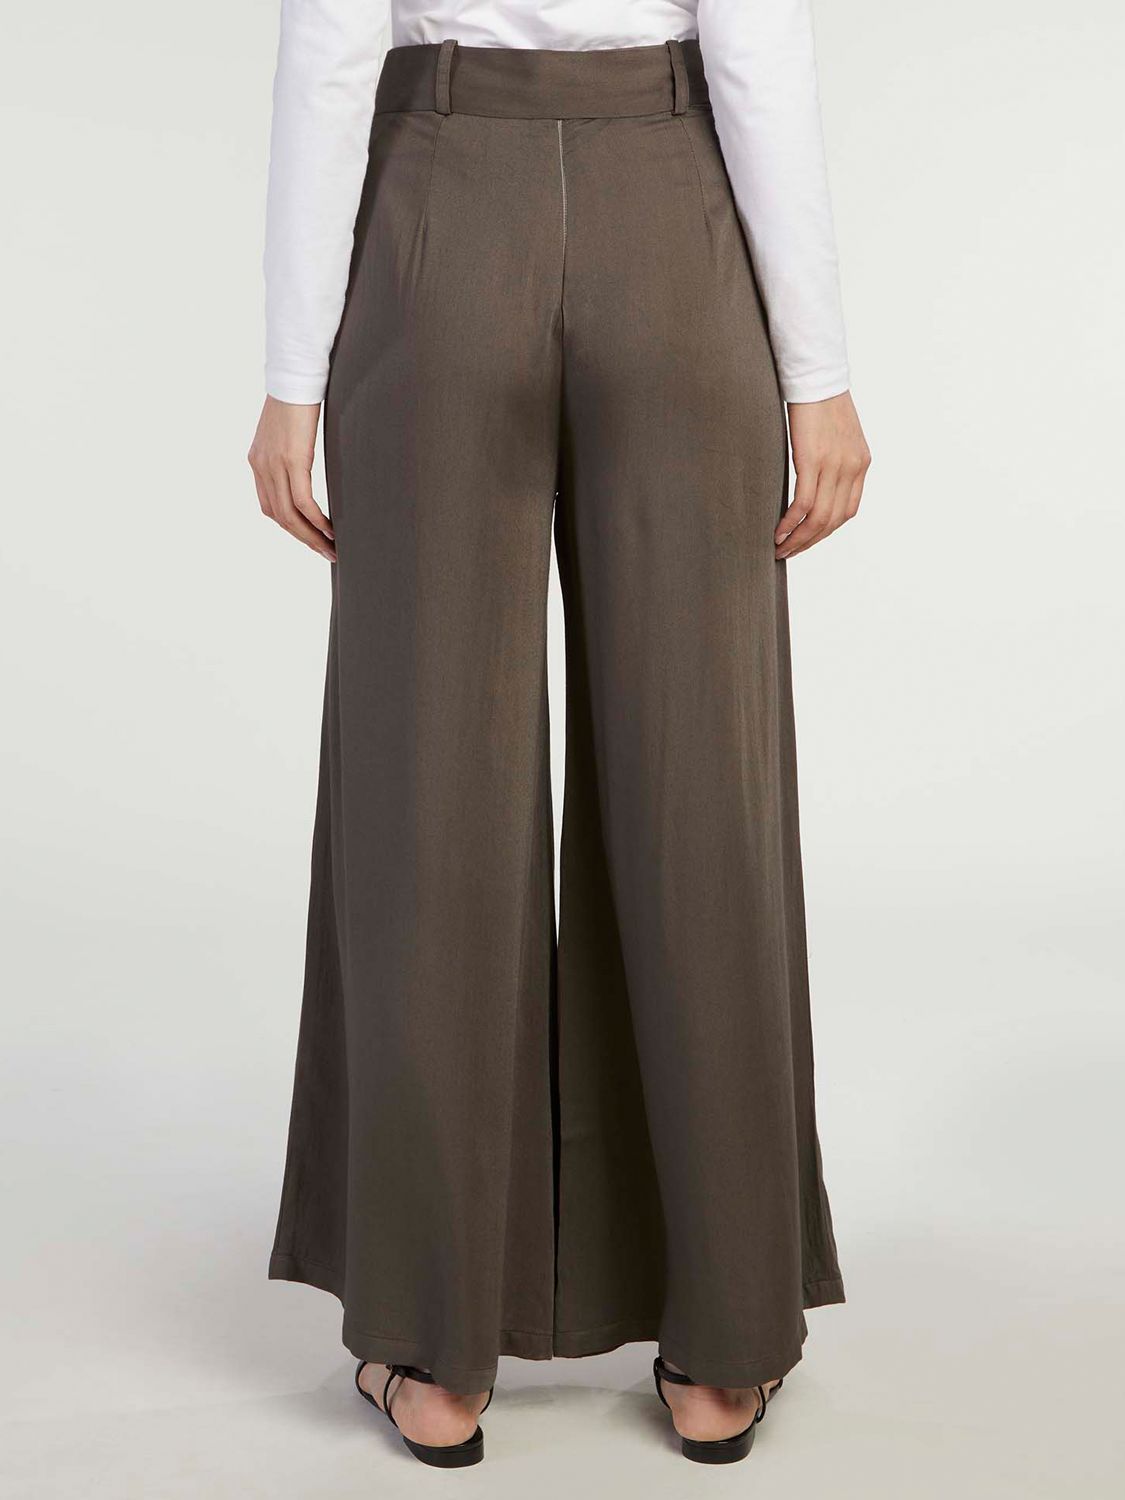 Buy Aab Twill Flare Trousers Online at johnlewis.com